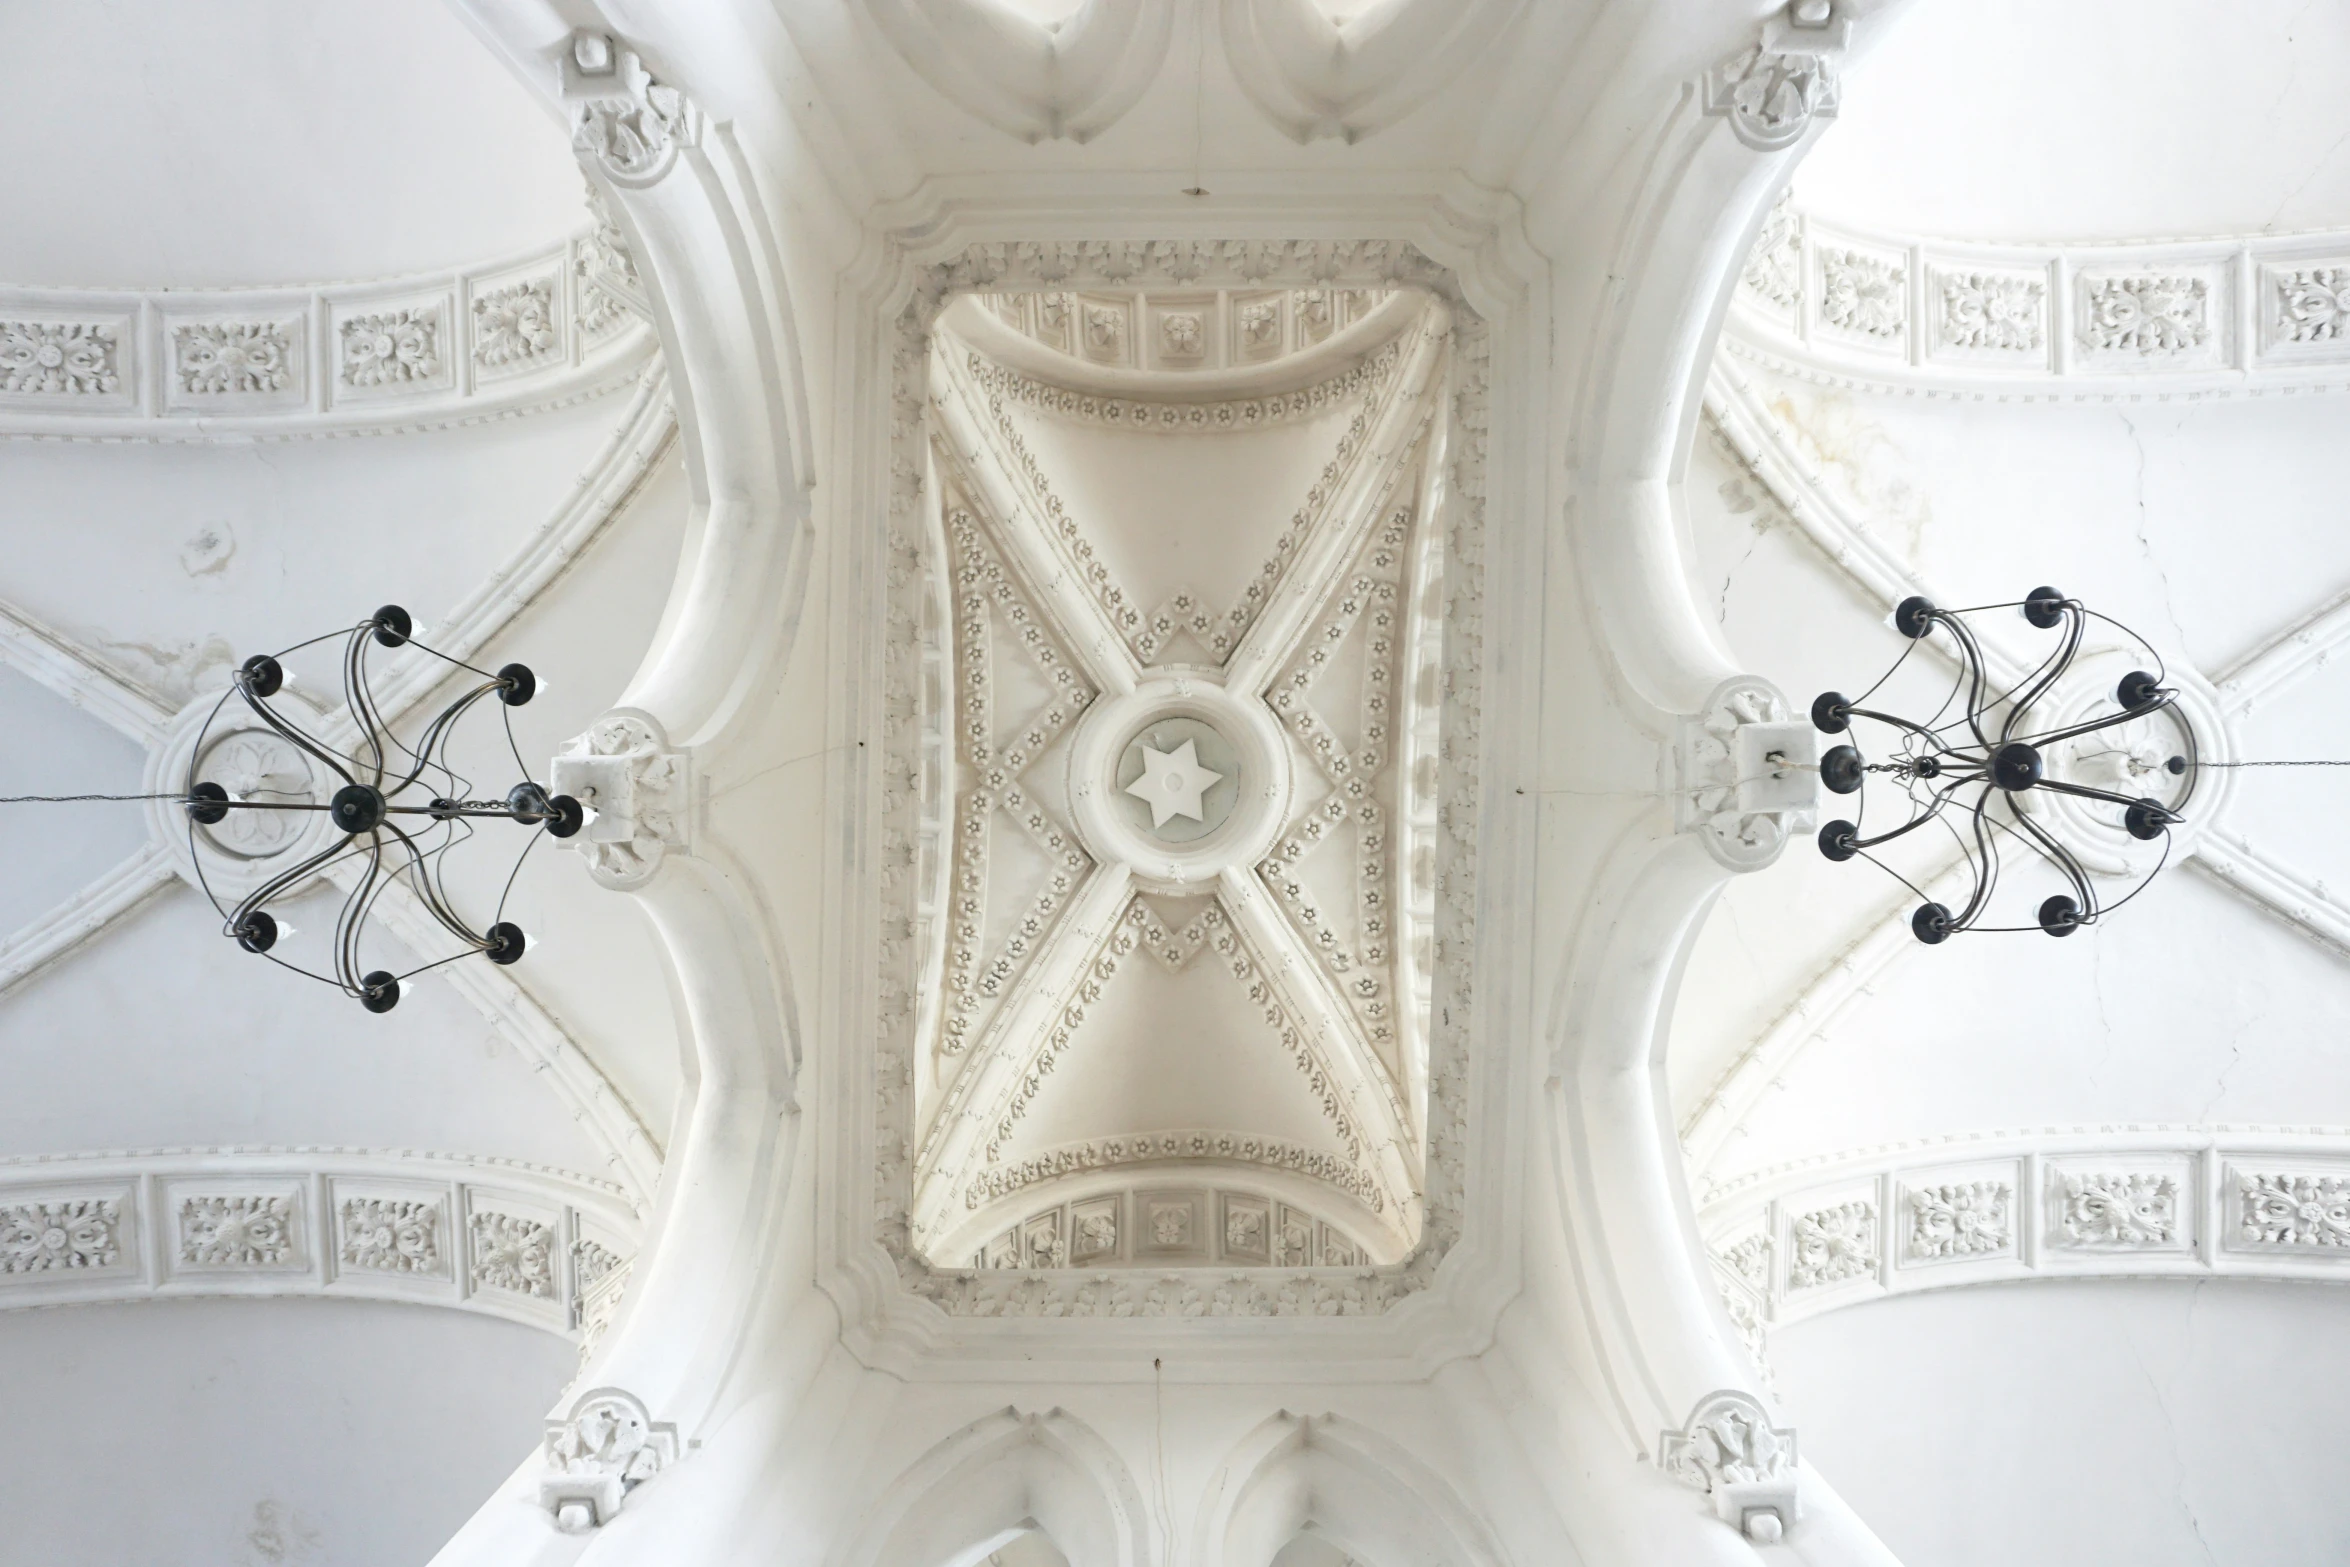 an architectural ceiling in a building with several black and white dots